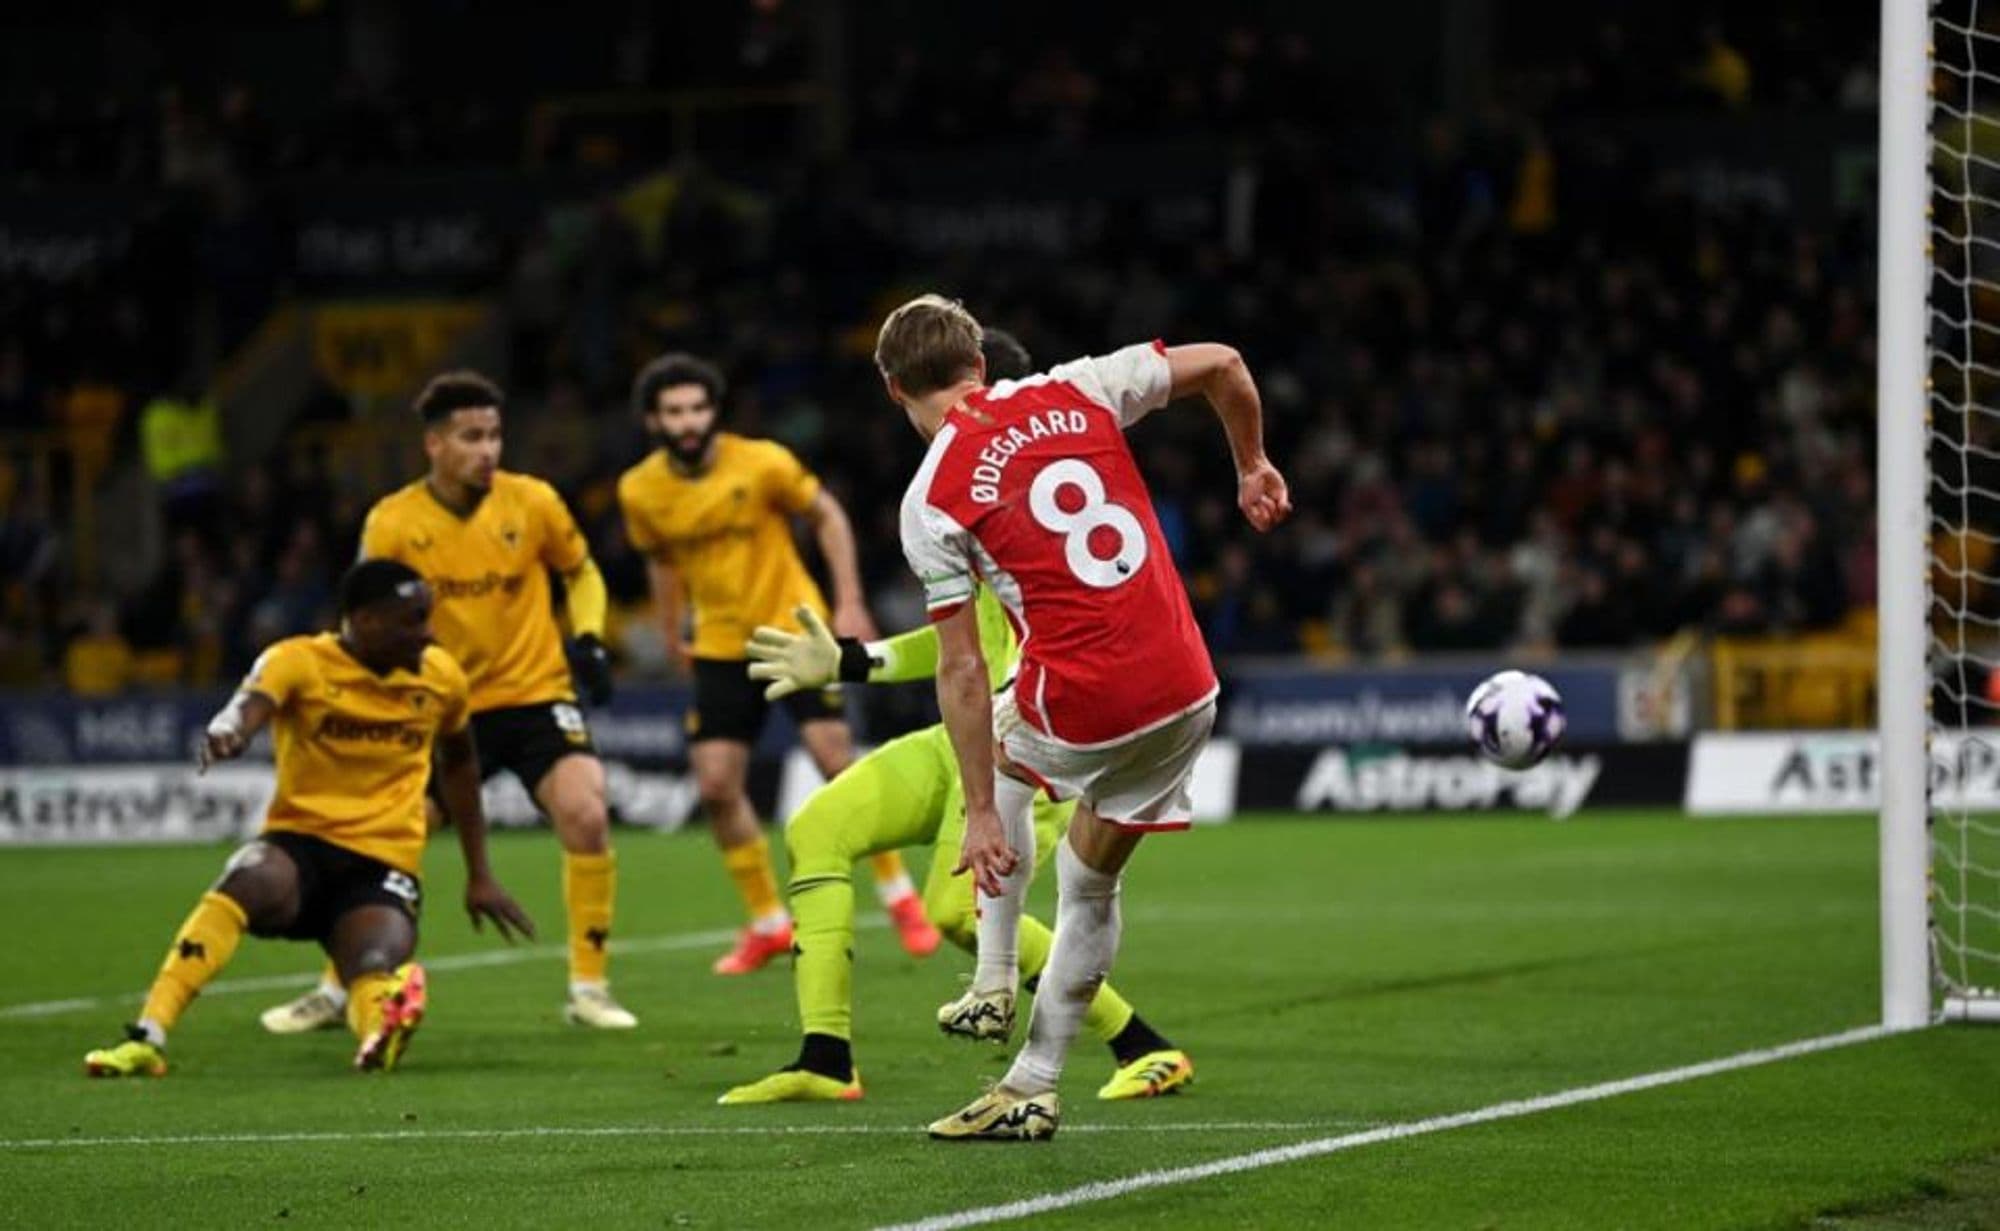 # Title: Arsenal's Gritty Win Over Wolves Sends Them Back to the Top of the Premier League